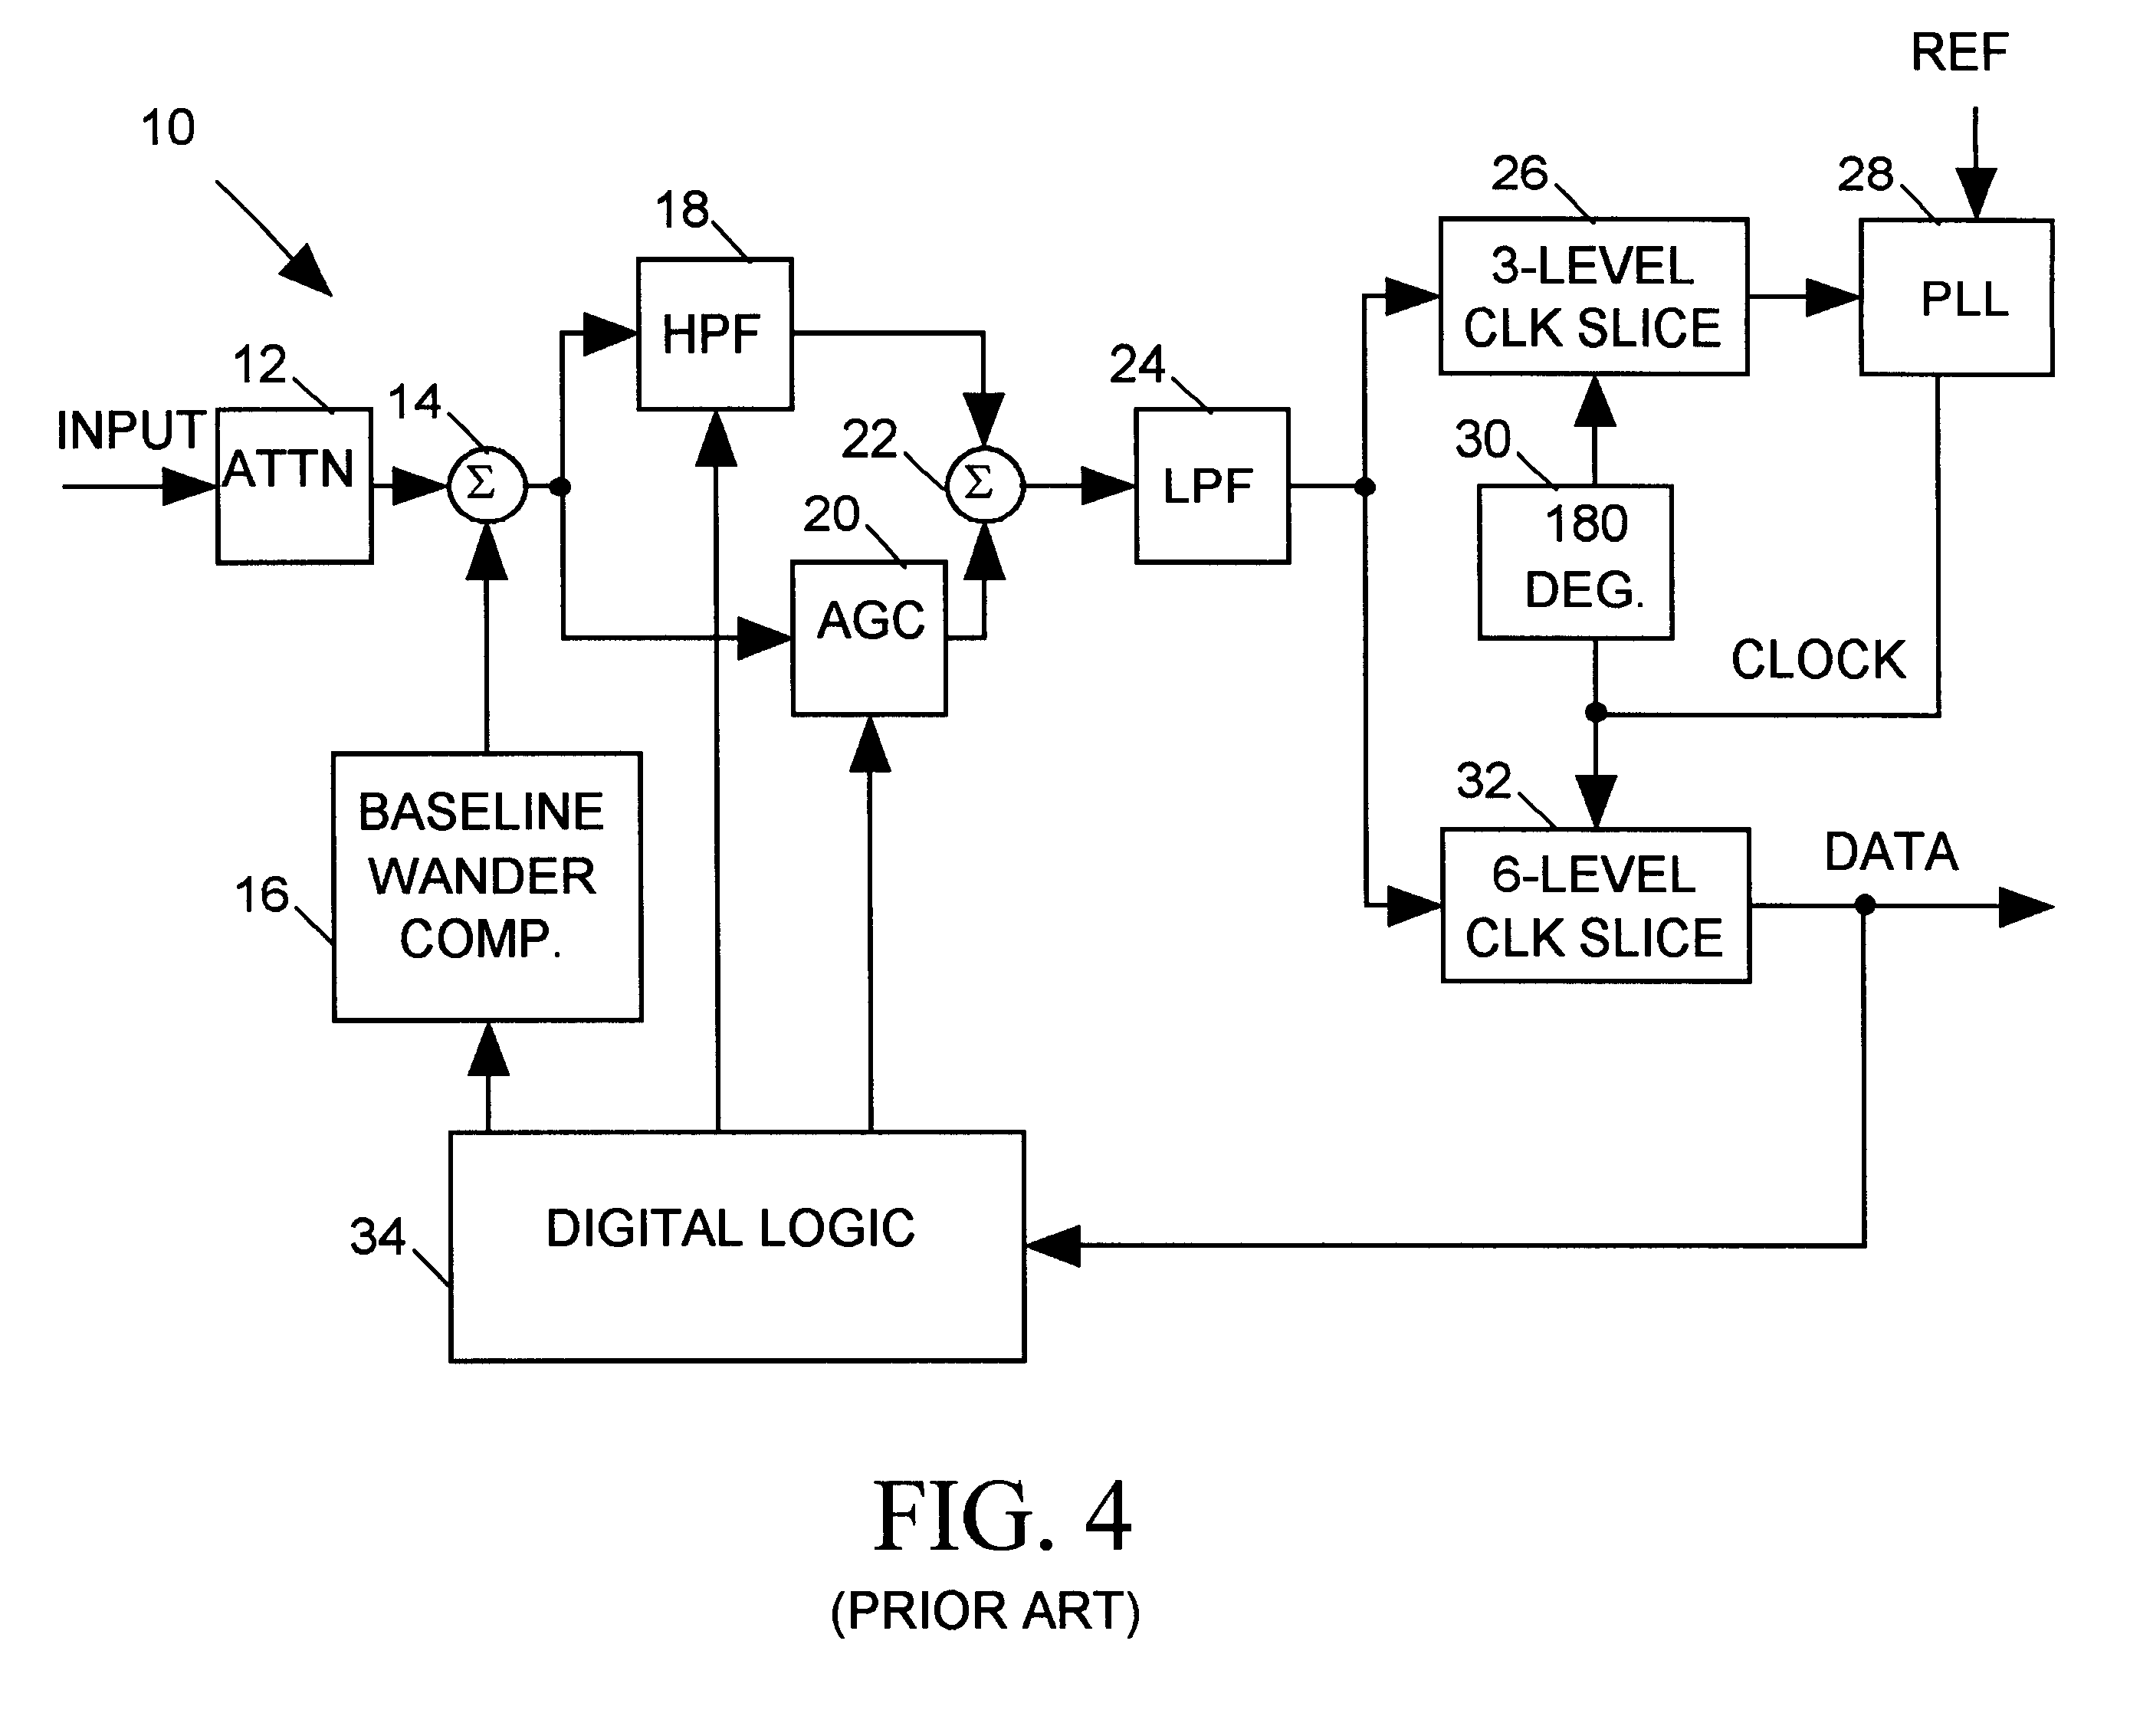 FIR filter architecture for 100Base-TX receiver